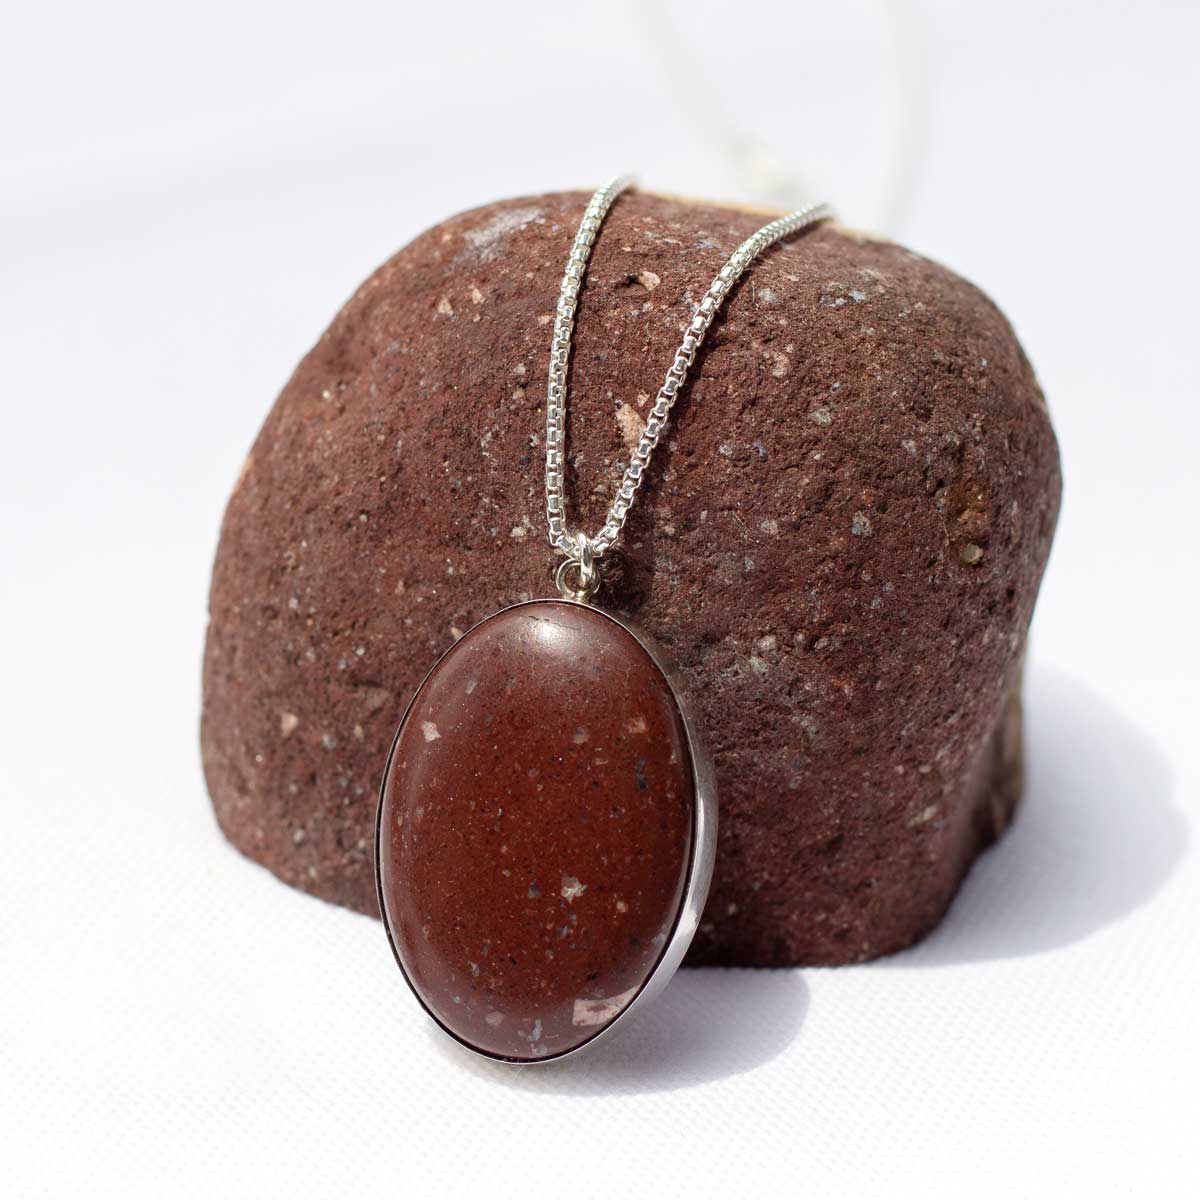 Natural red stone turned into statement pendant necklace with sterling silver chain